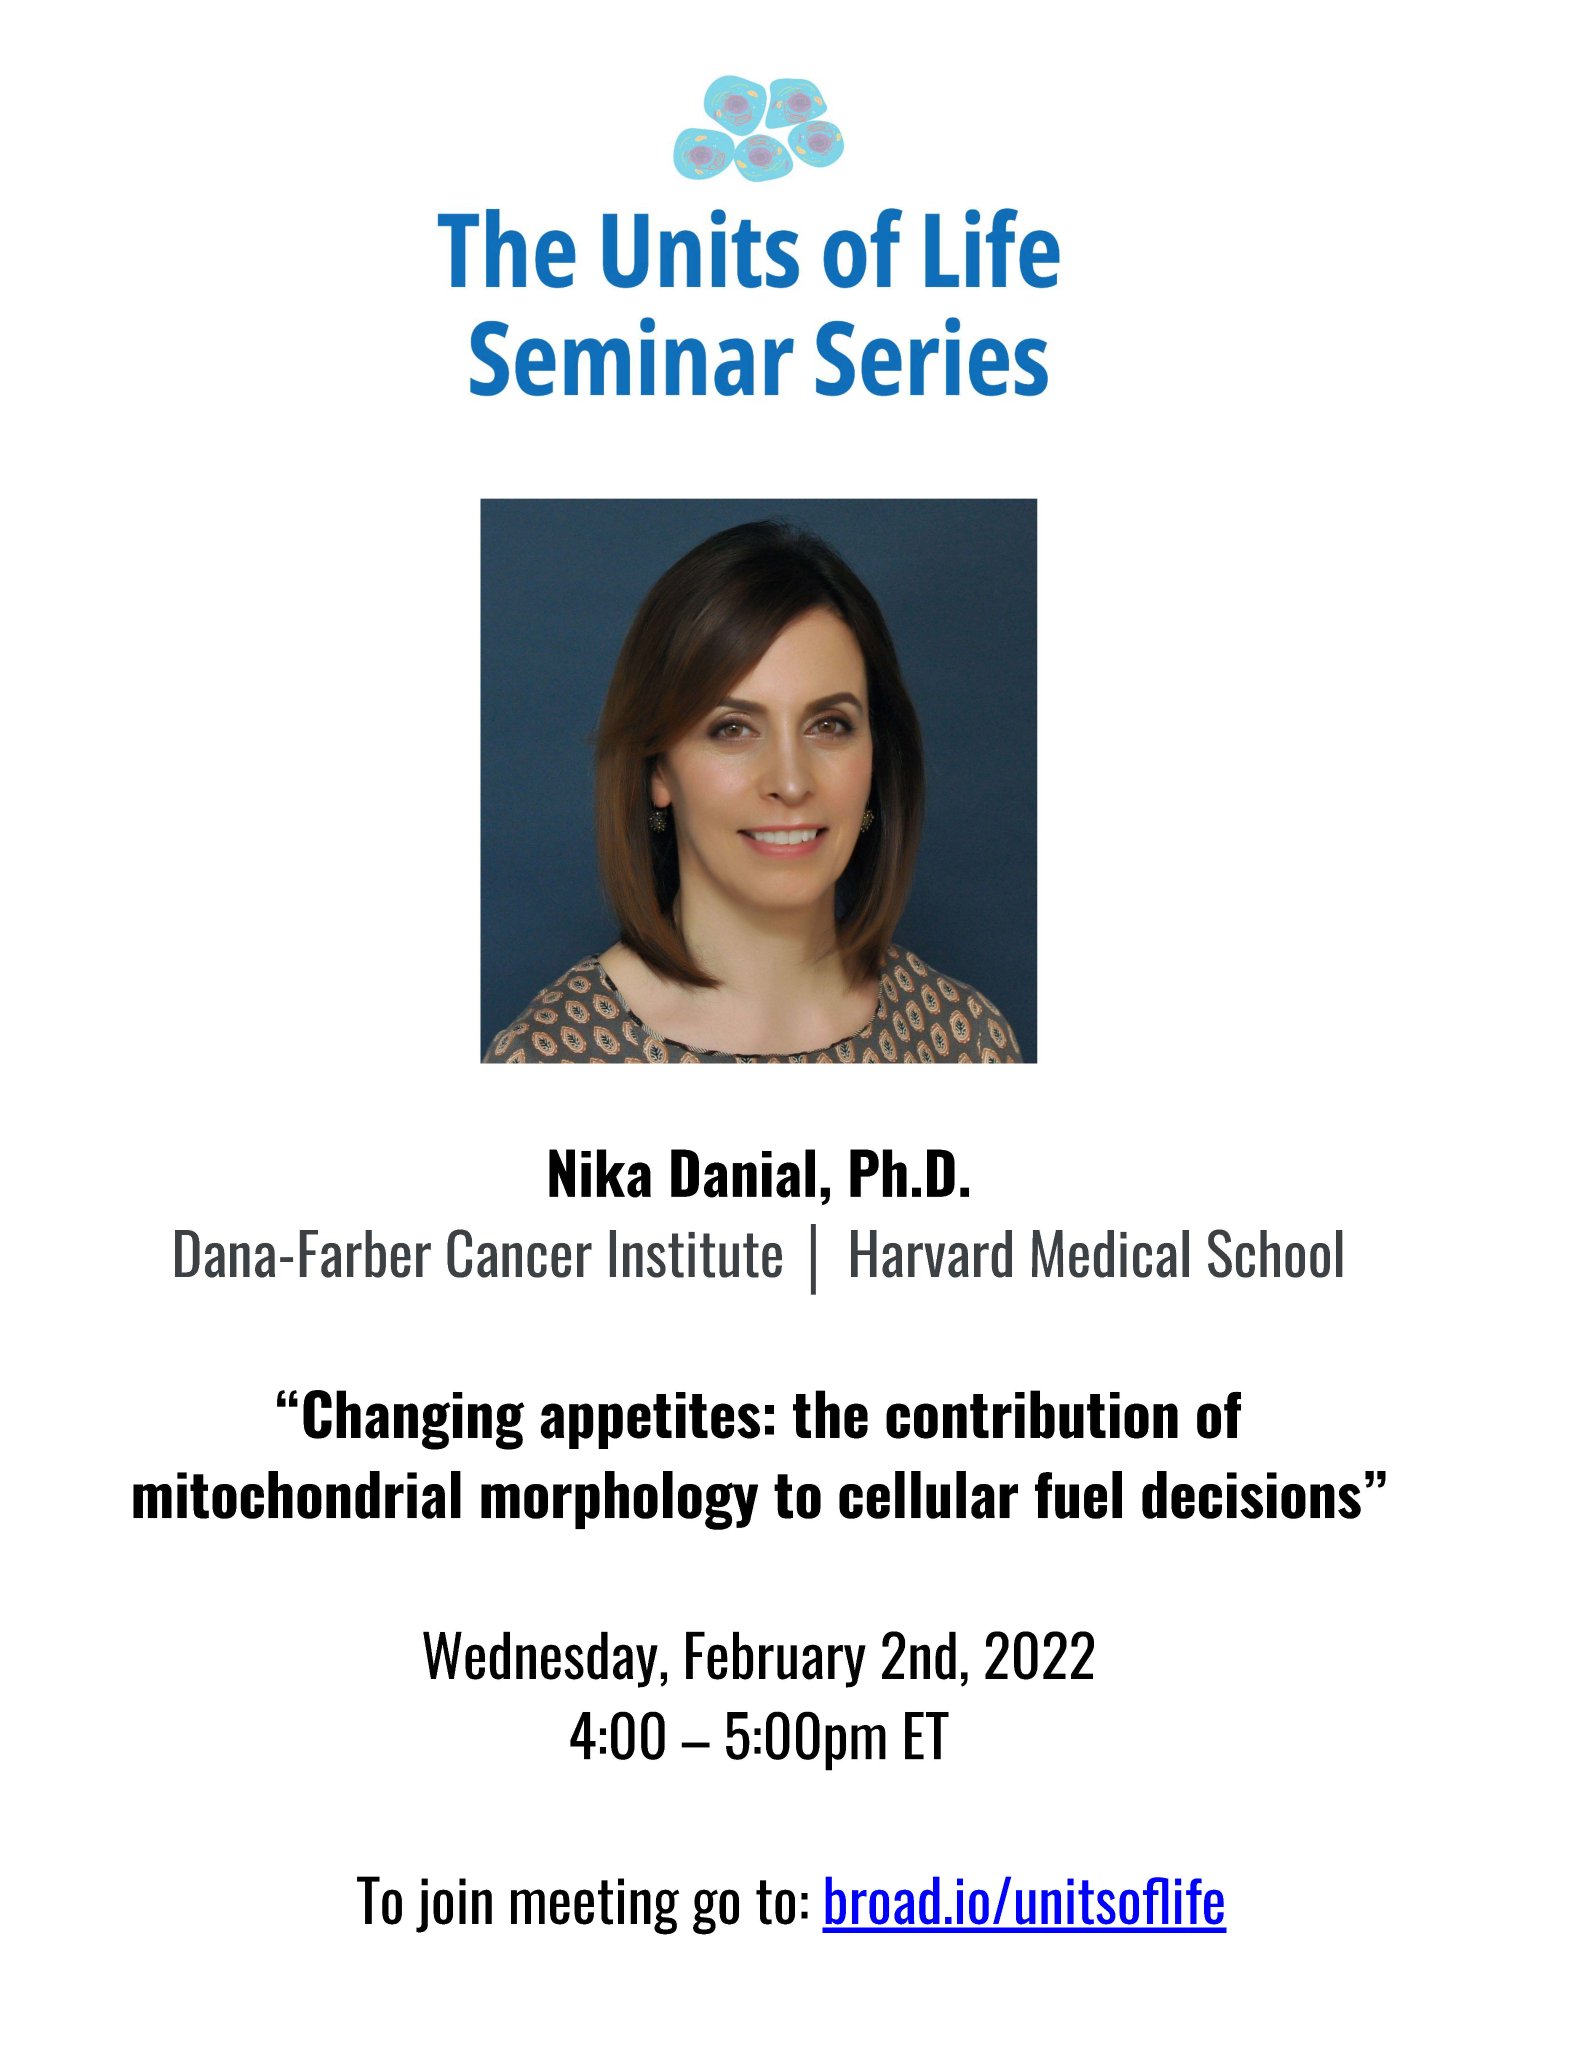 paso Cristo Zoológico de noche Greka Lab on Twitter: "Exciting talk alert! Join the Cell Biology Community  at Broad on February 2nd for the next installment of Units of Life  featuring Nika Danial @broadinstitute @DFCI_ChemBio @HarvardCellBio  https://t.co/KNF7JdG62r" /